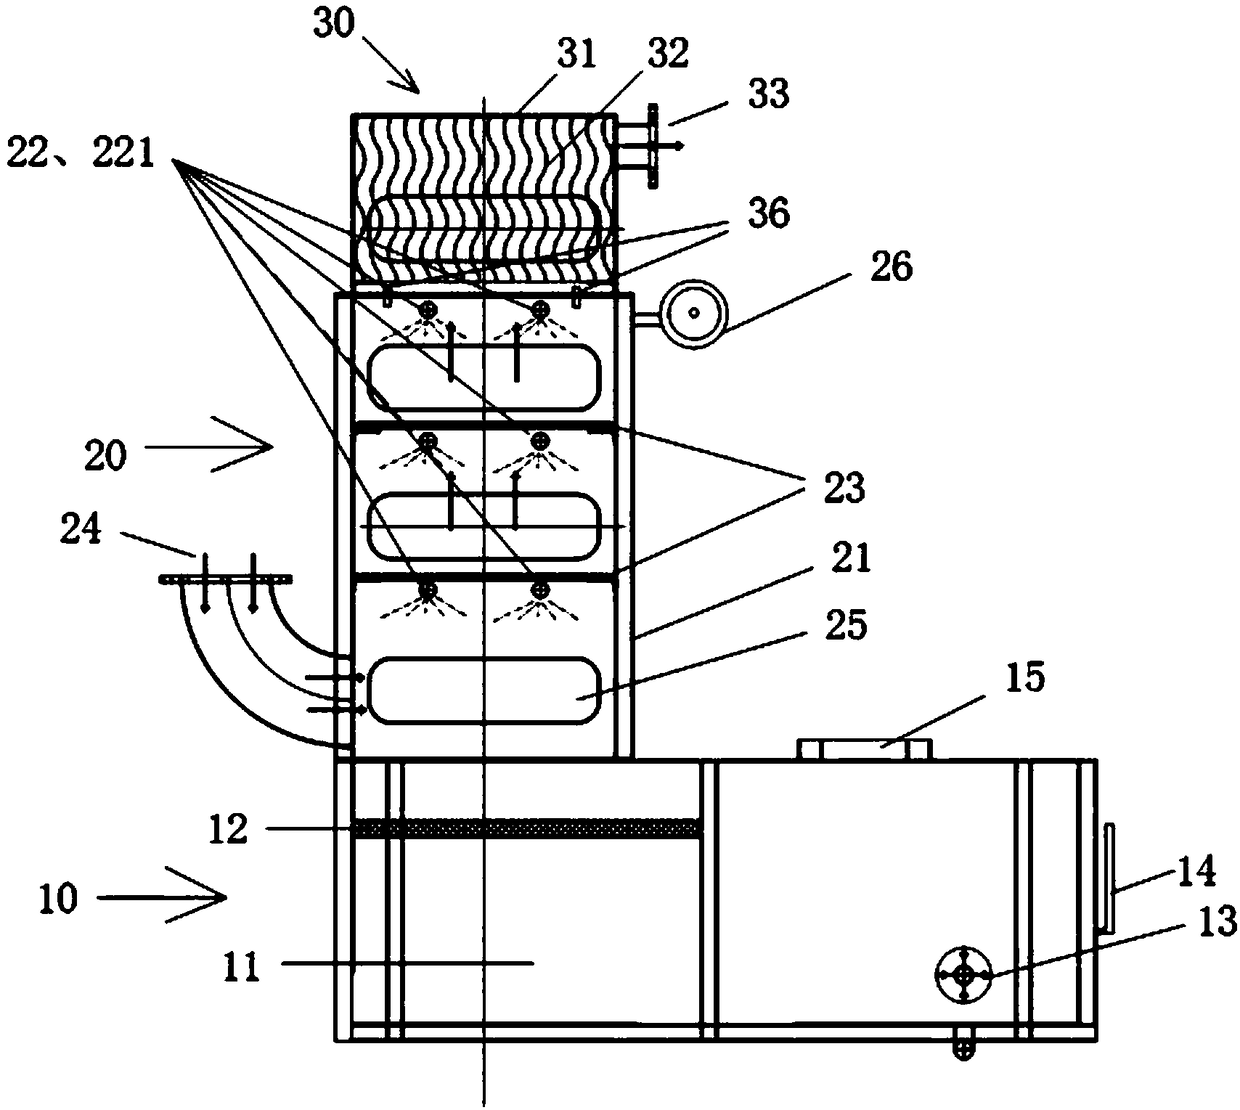 Tail gas treatment device based on small-scale incinerator and carbide finance and treatment process